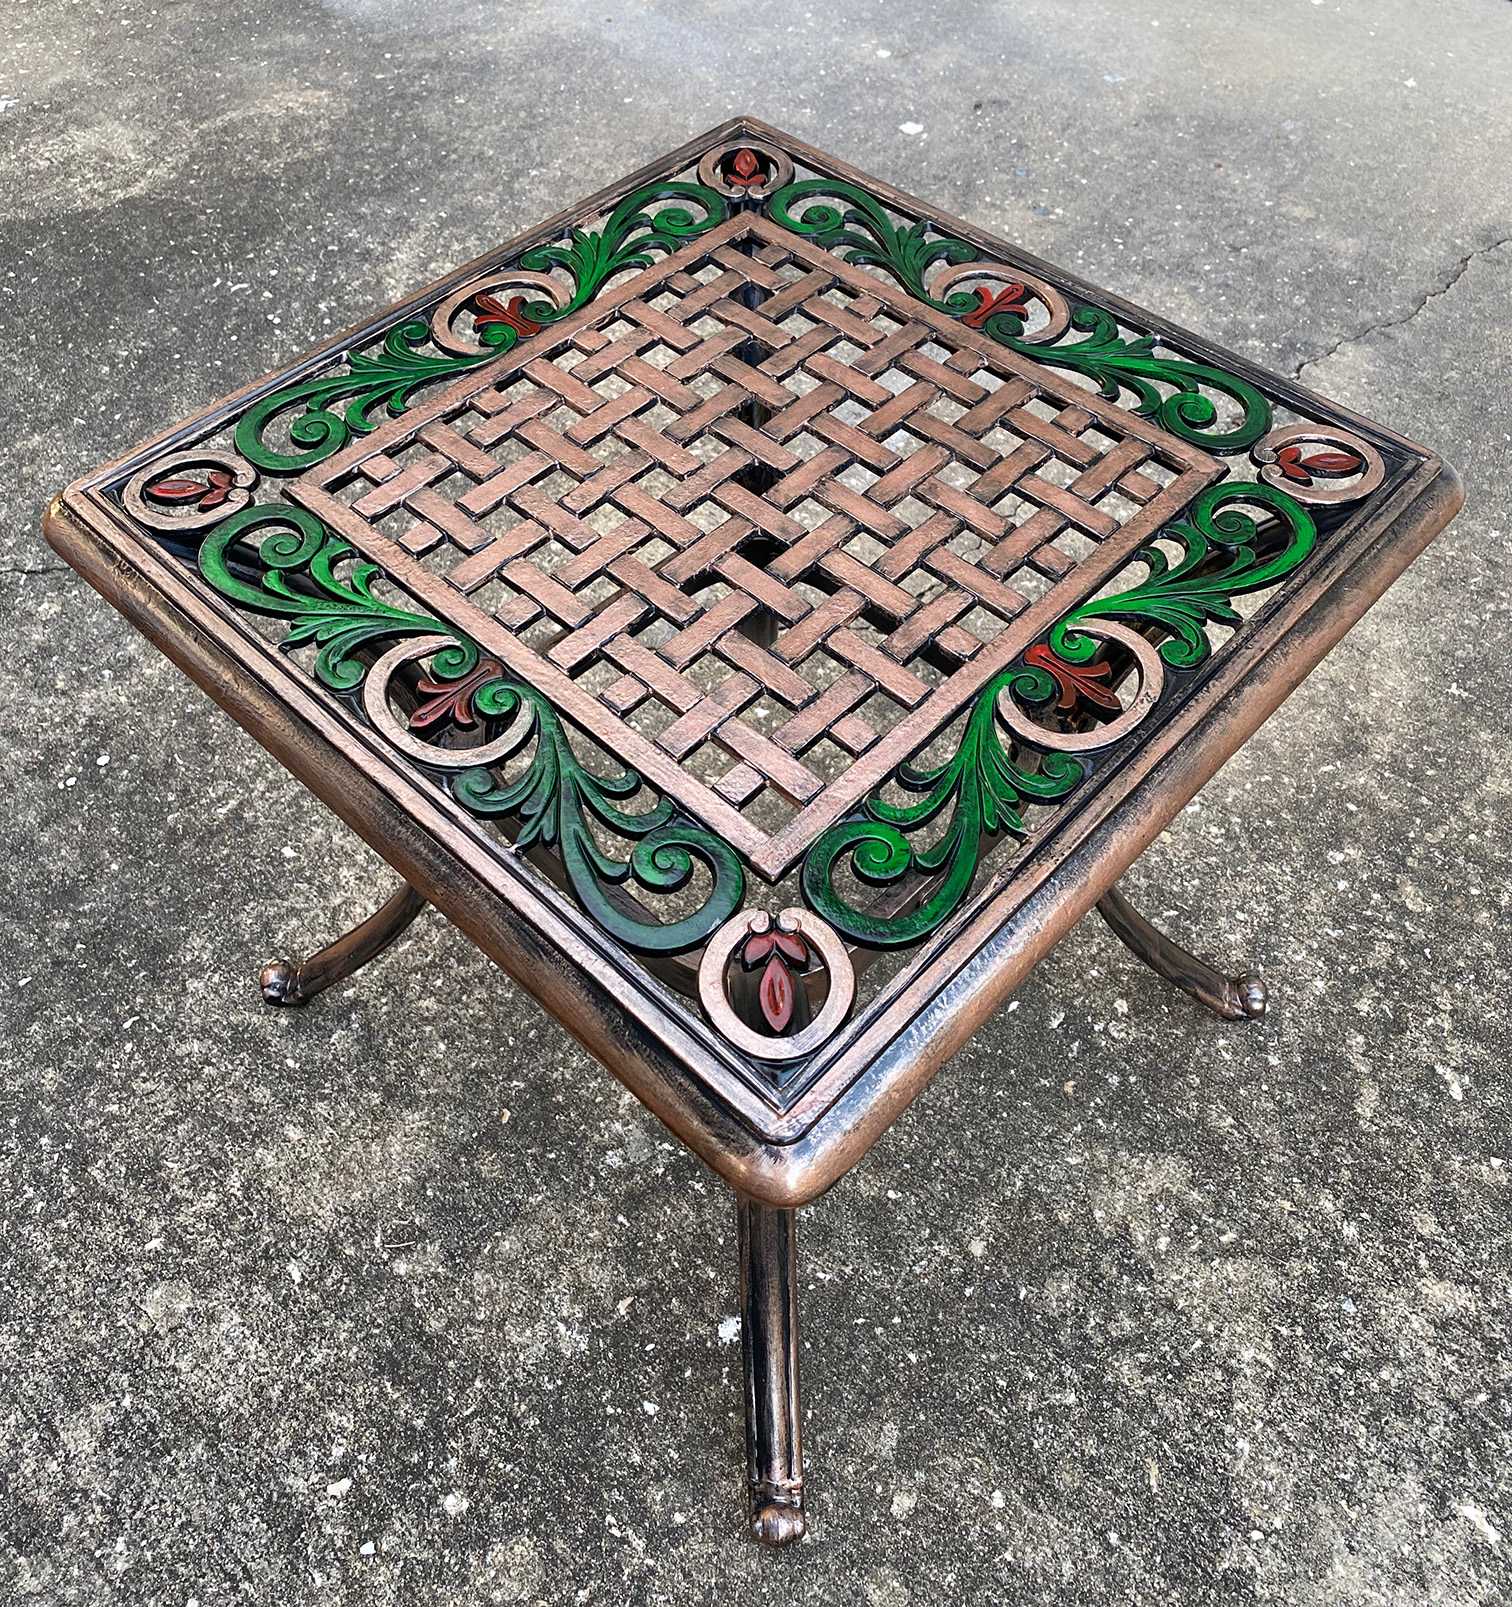 Aluminum table painted and restored into a work of art